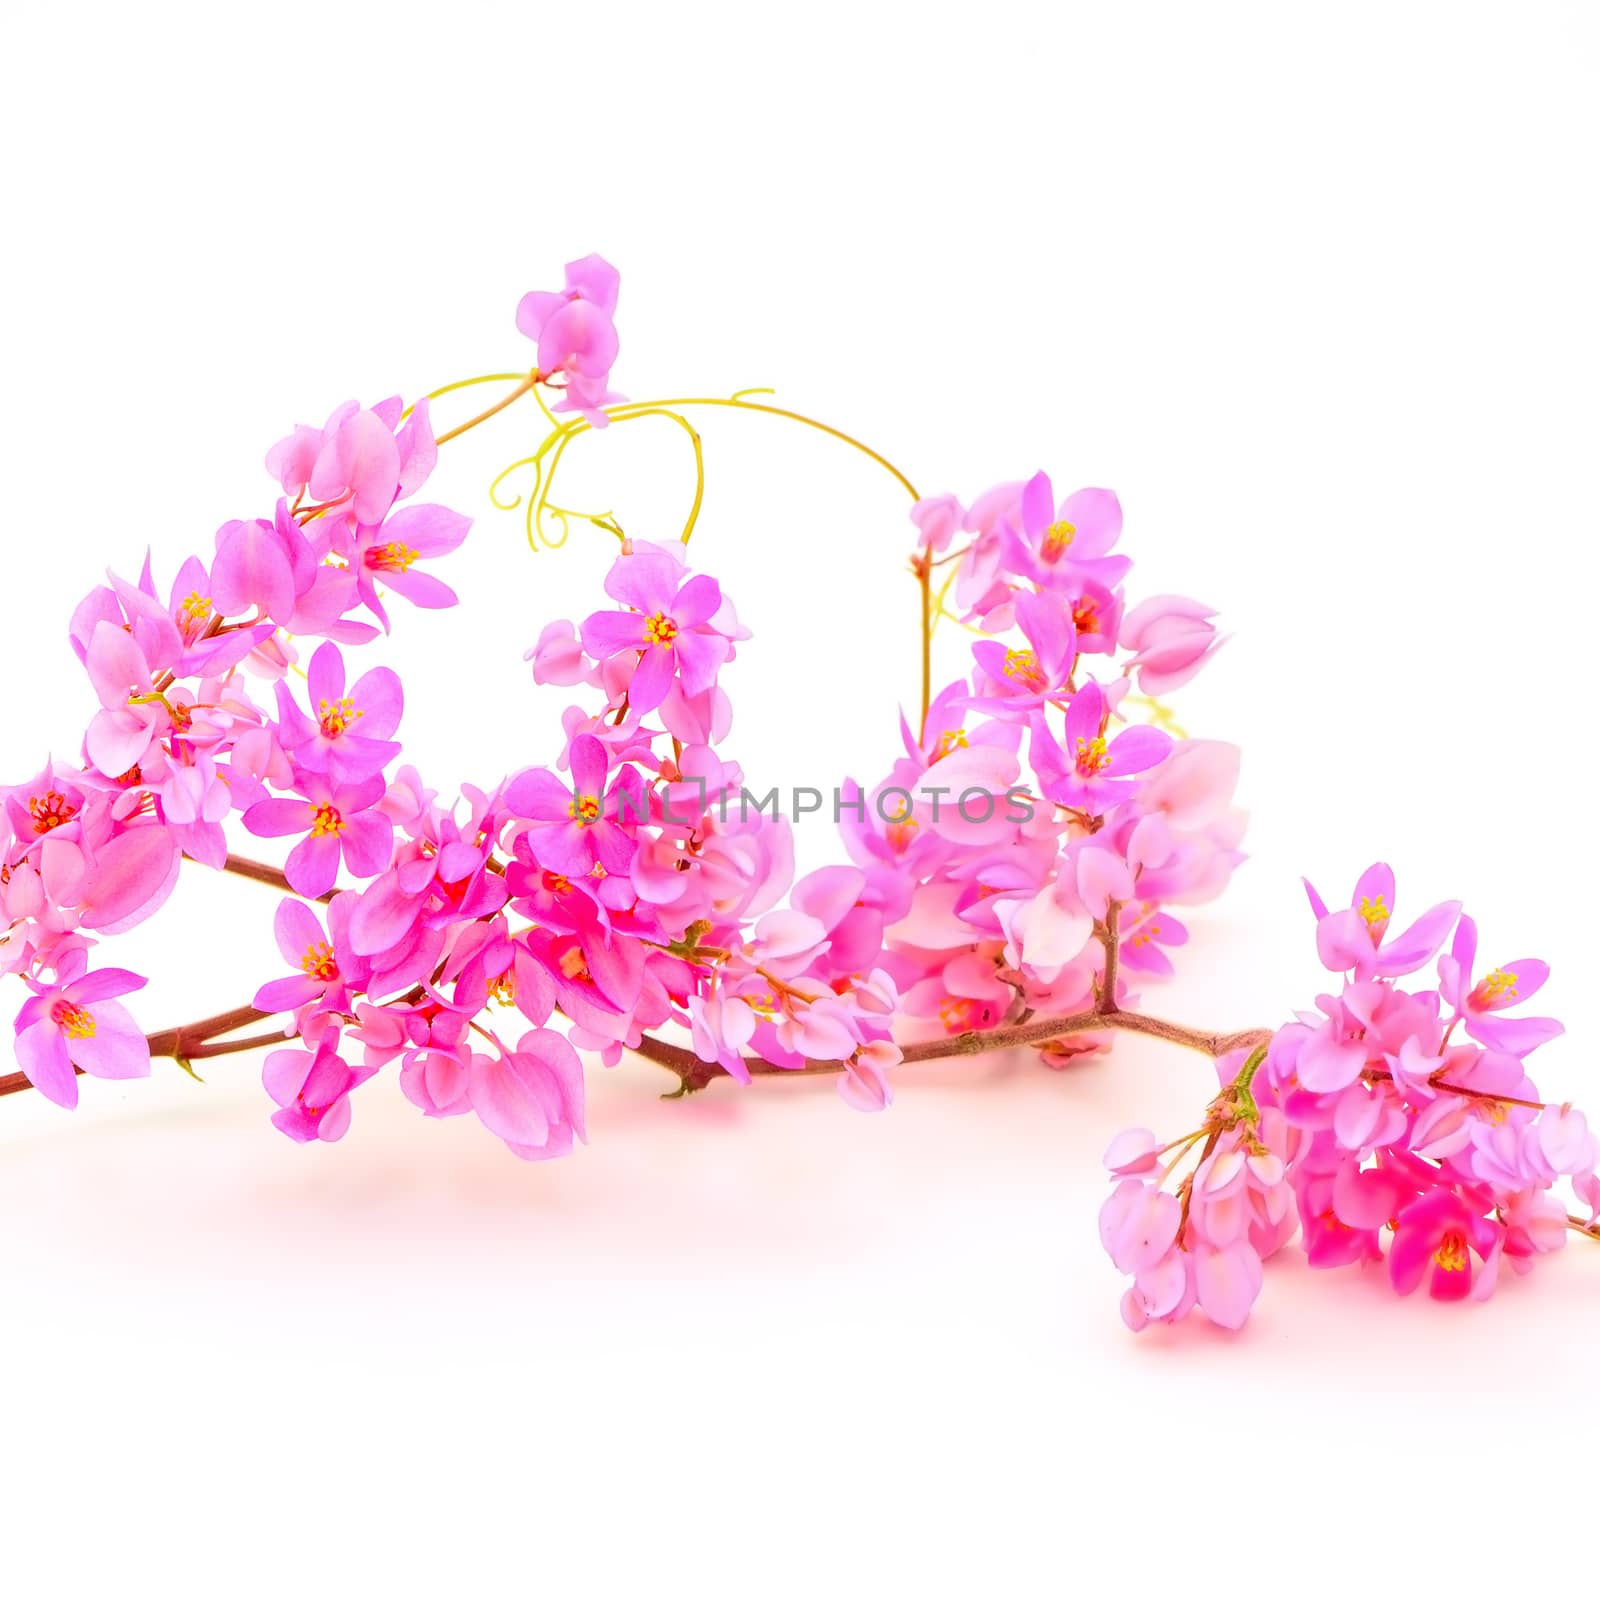 Summer blossom flower, beautiful Antigonon leptopus or Pink Coral Vine isolated on a white background